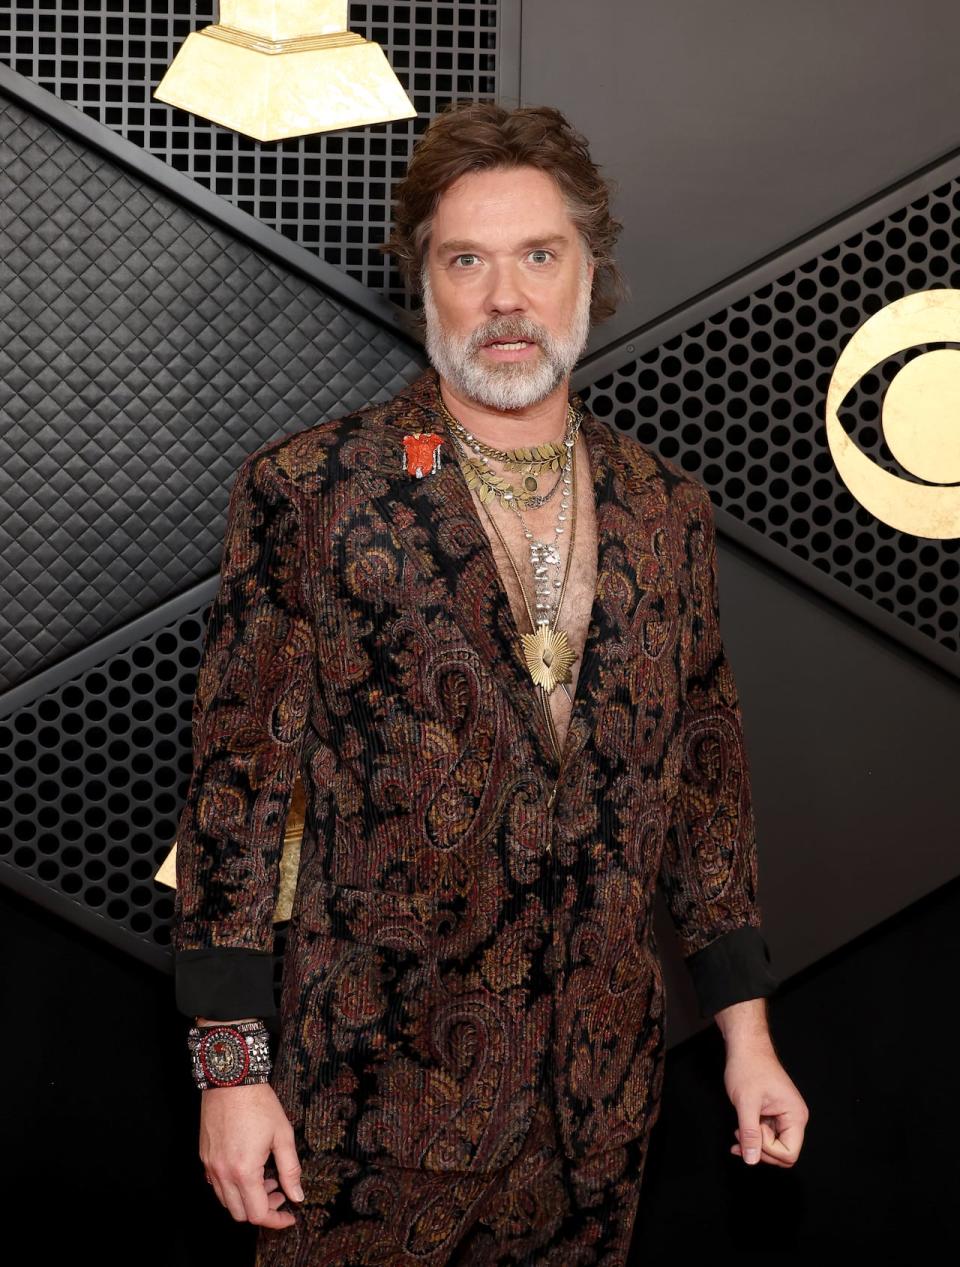 Montreal singer-songwriter Rufus Wainwright attends the 66th Grammy Awards. He was nominated for the best folk album award, which ultimately went to his fellow Canadian Joni Mitchell.